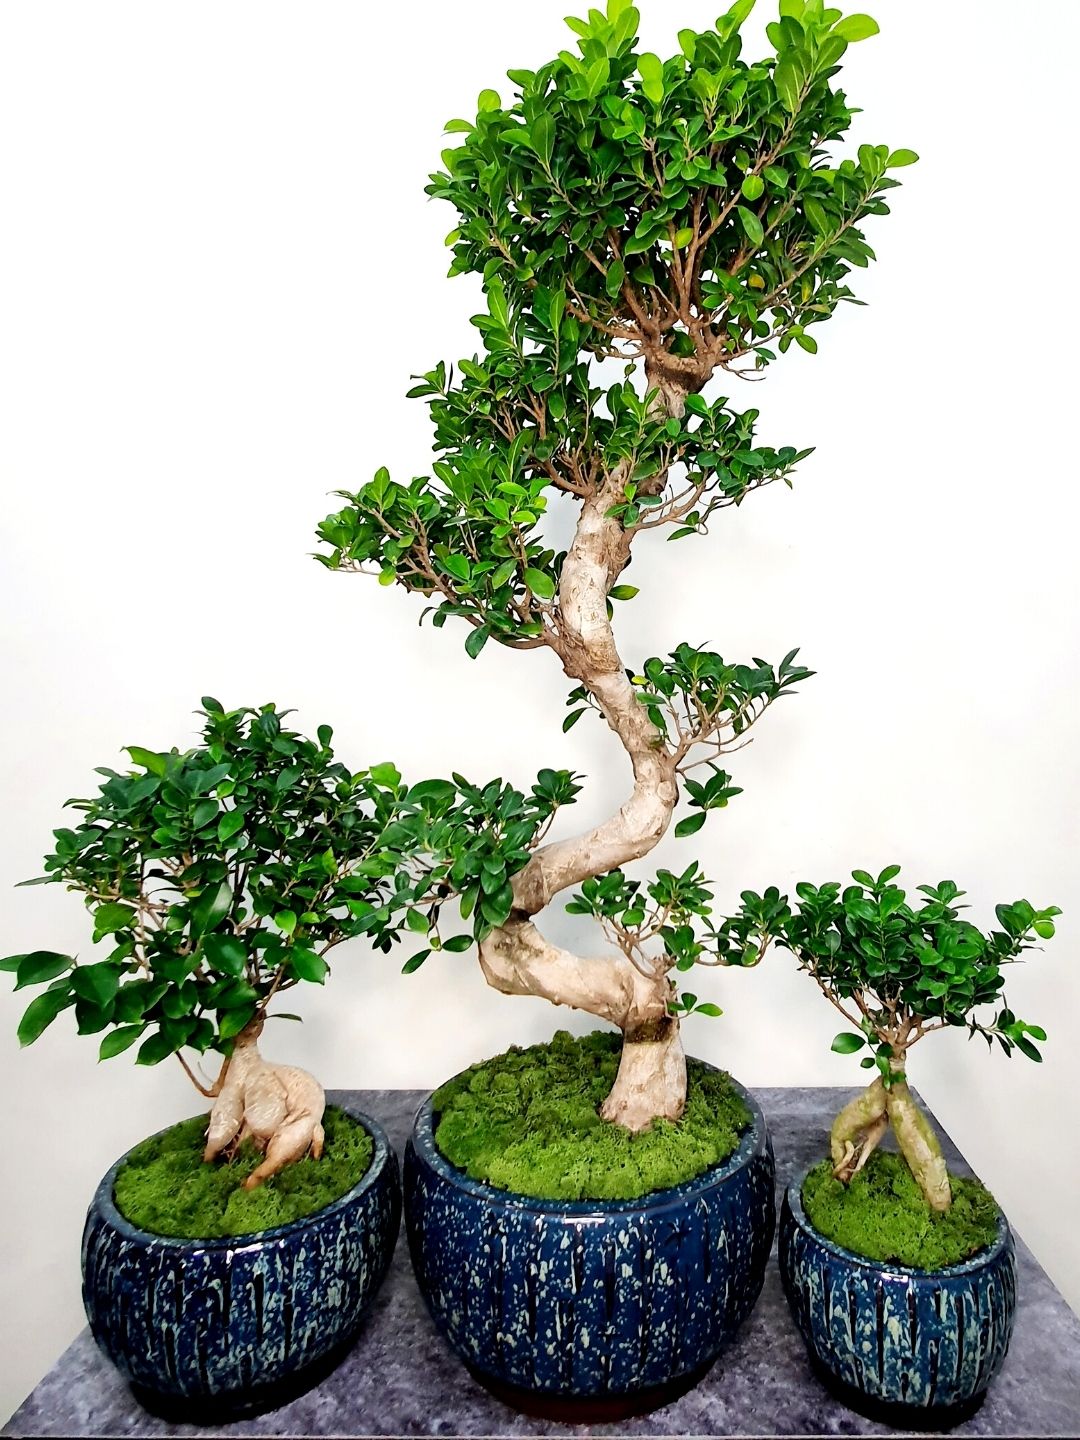 Potted XL Bonsai Tree - S Shape Planted in Fiber White Shallow Pot with Moss Topping